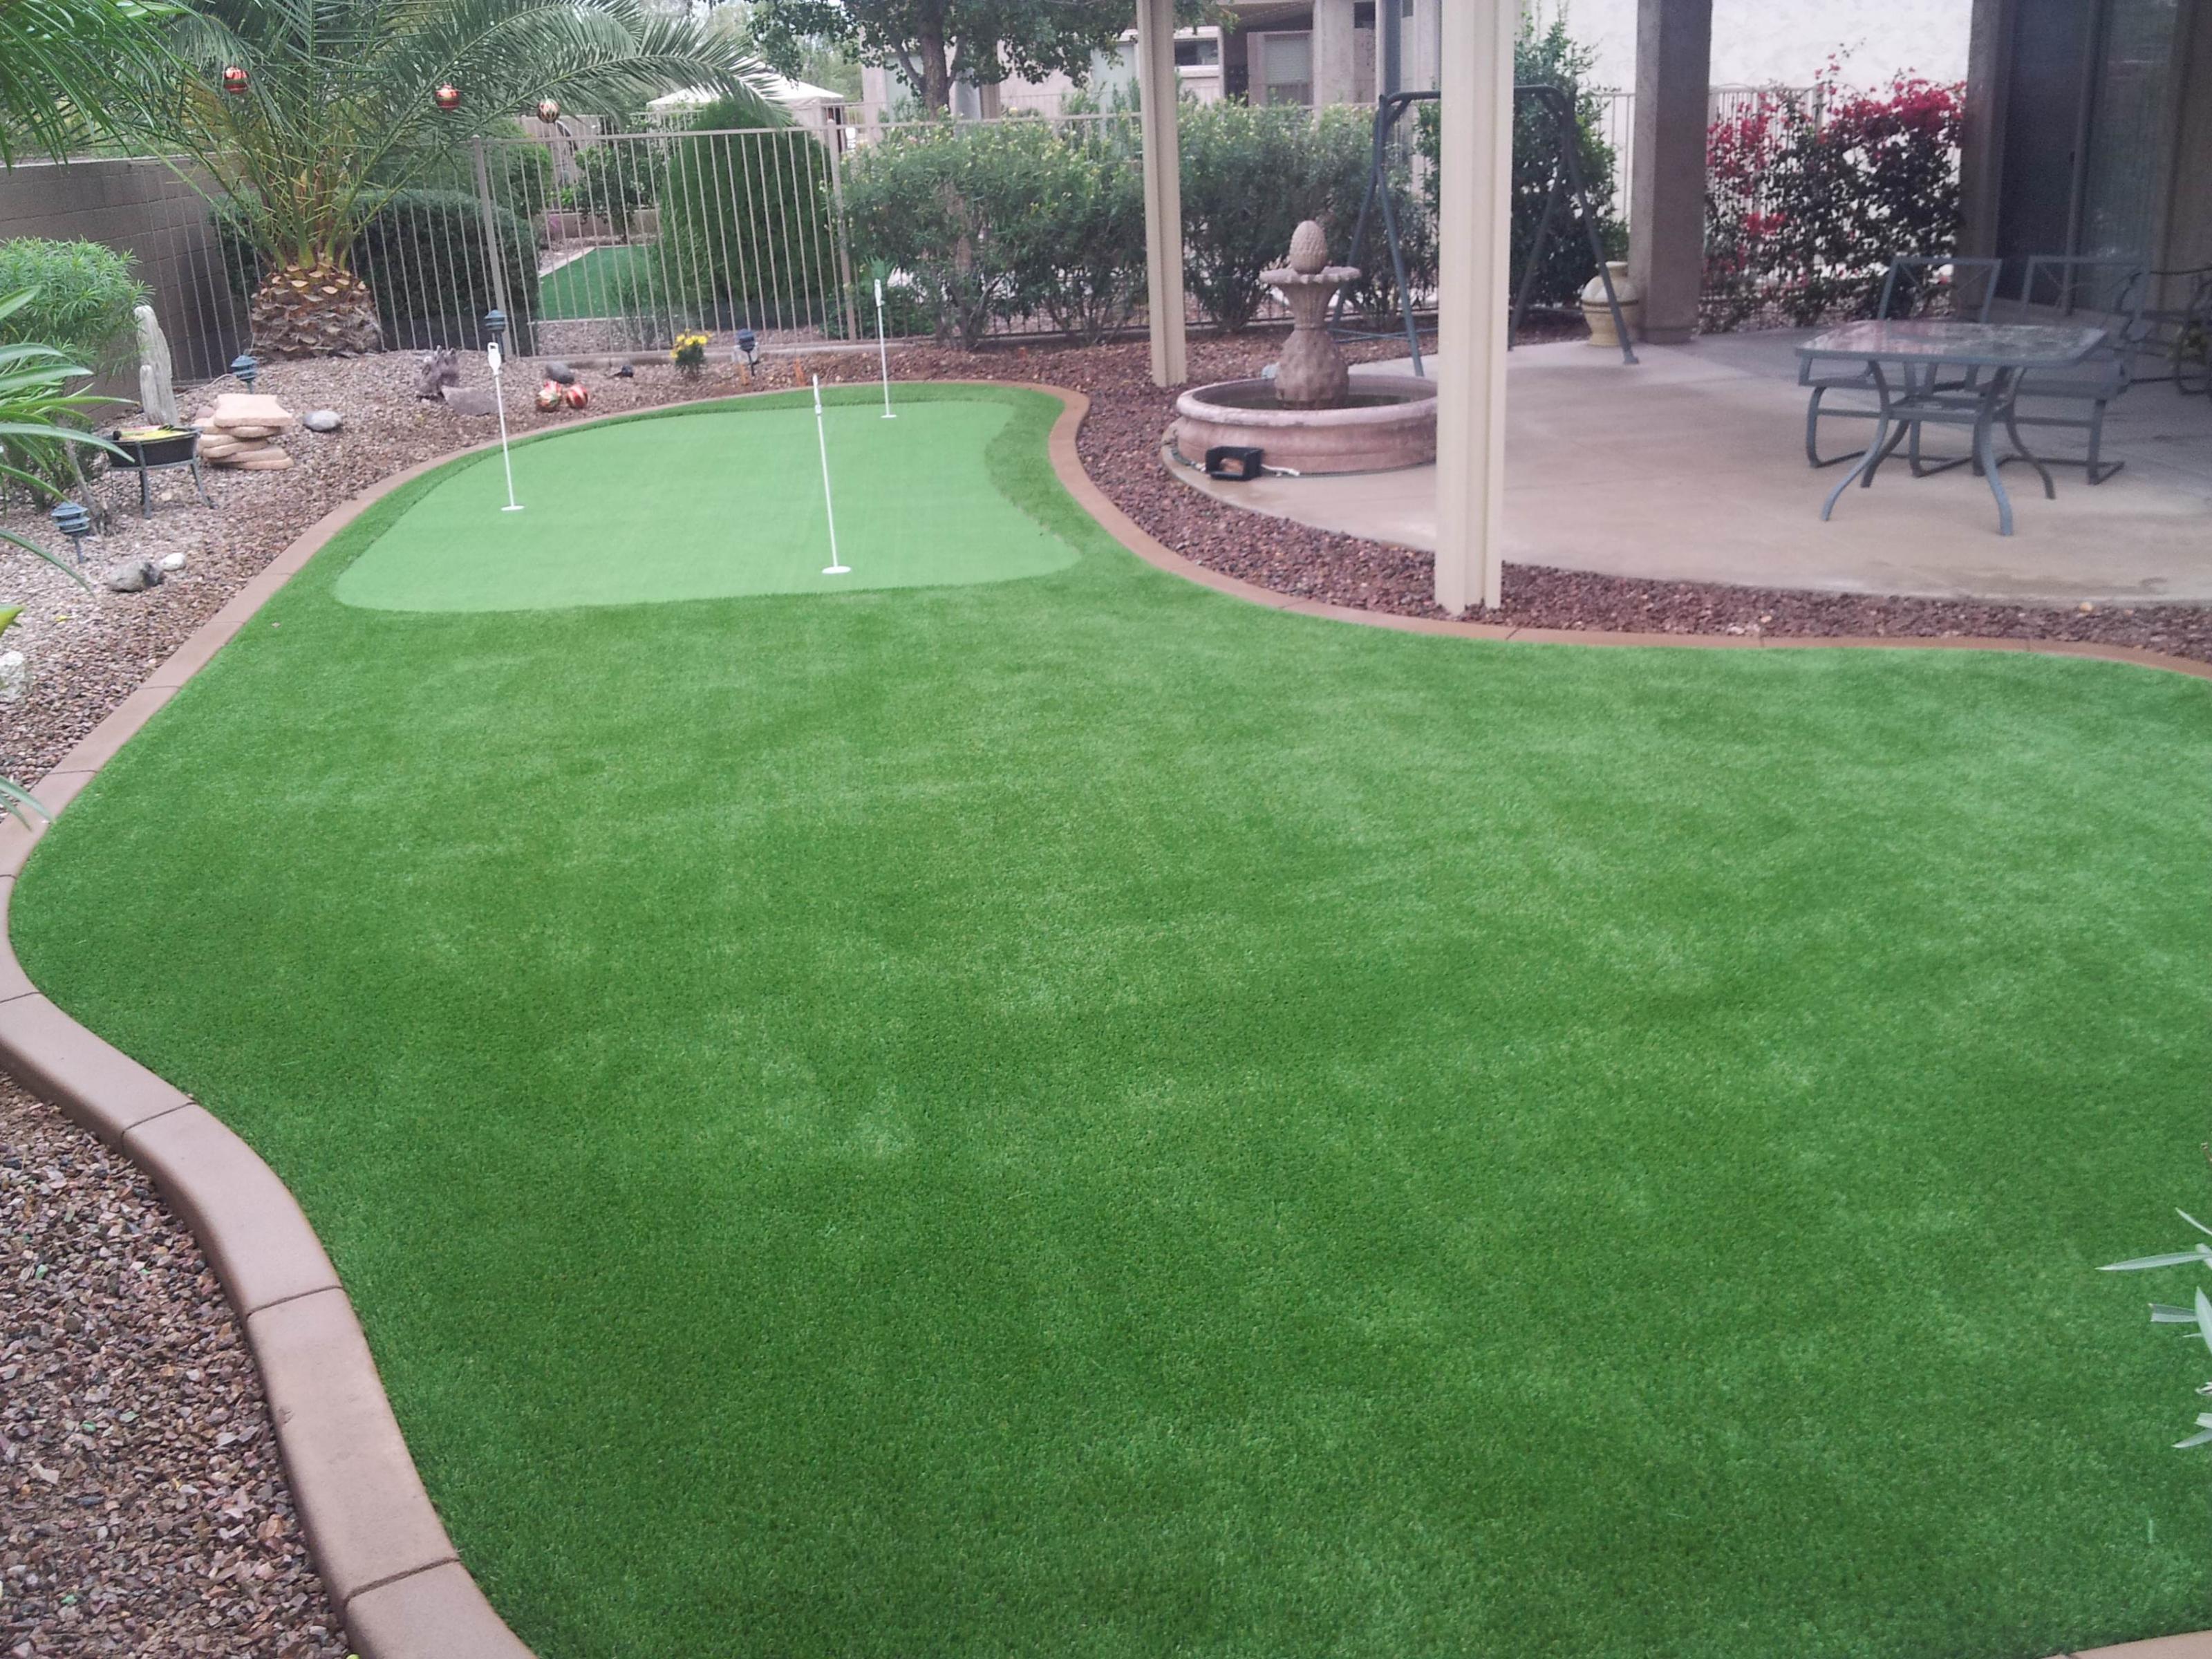 Tempe Artificial Grass. Fake Grass Landscapes Improve Yards